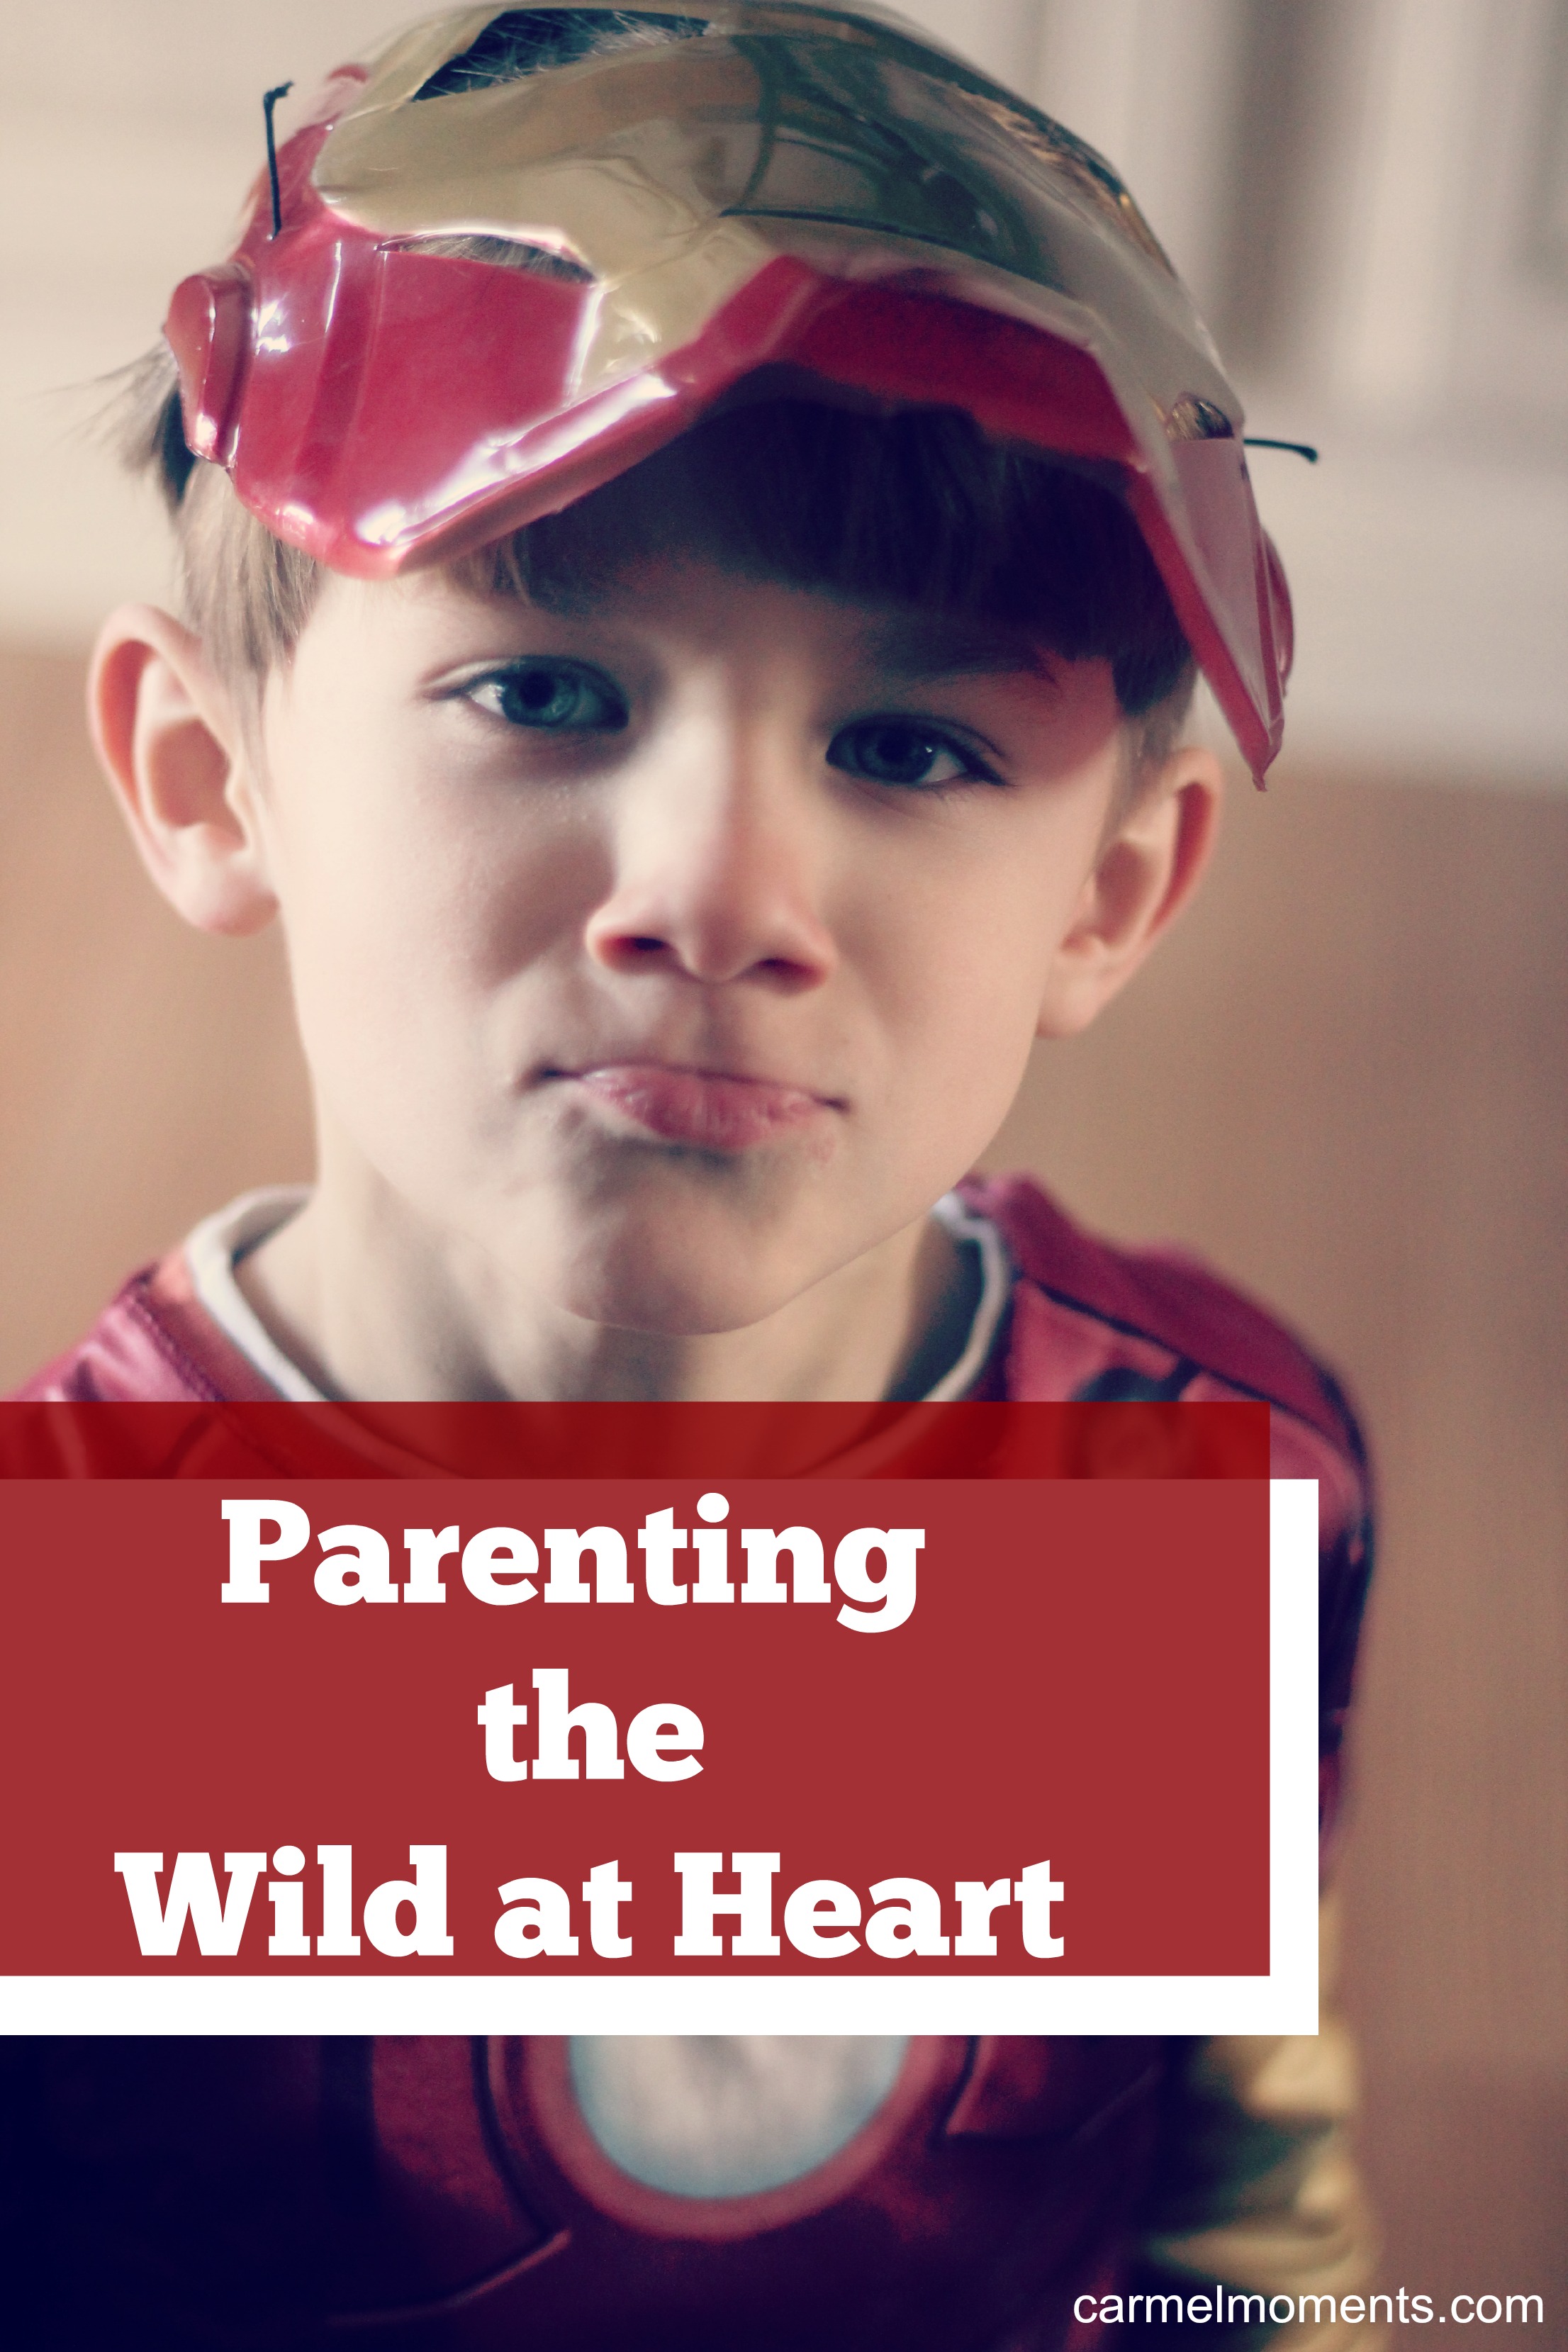 Parenting the Wild at Heart